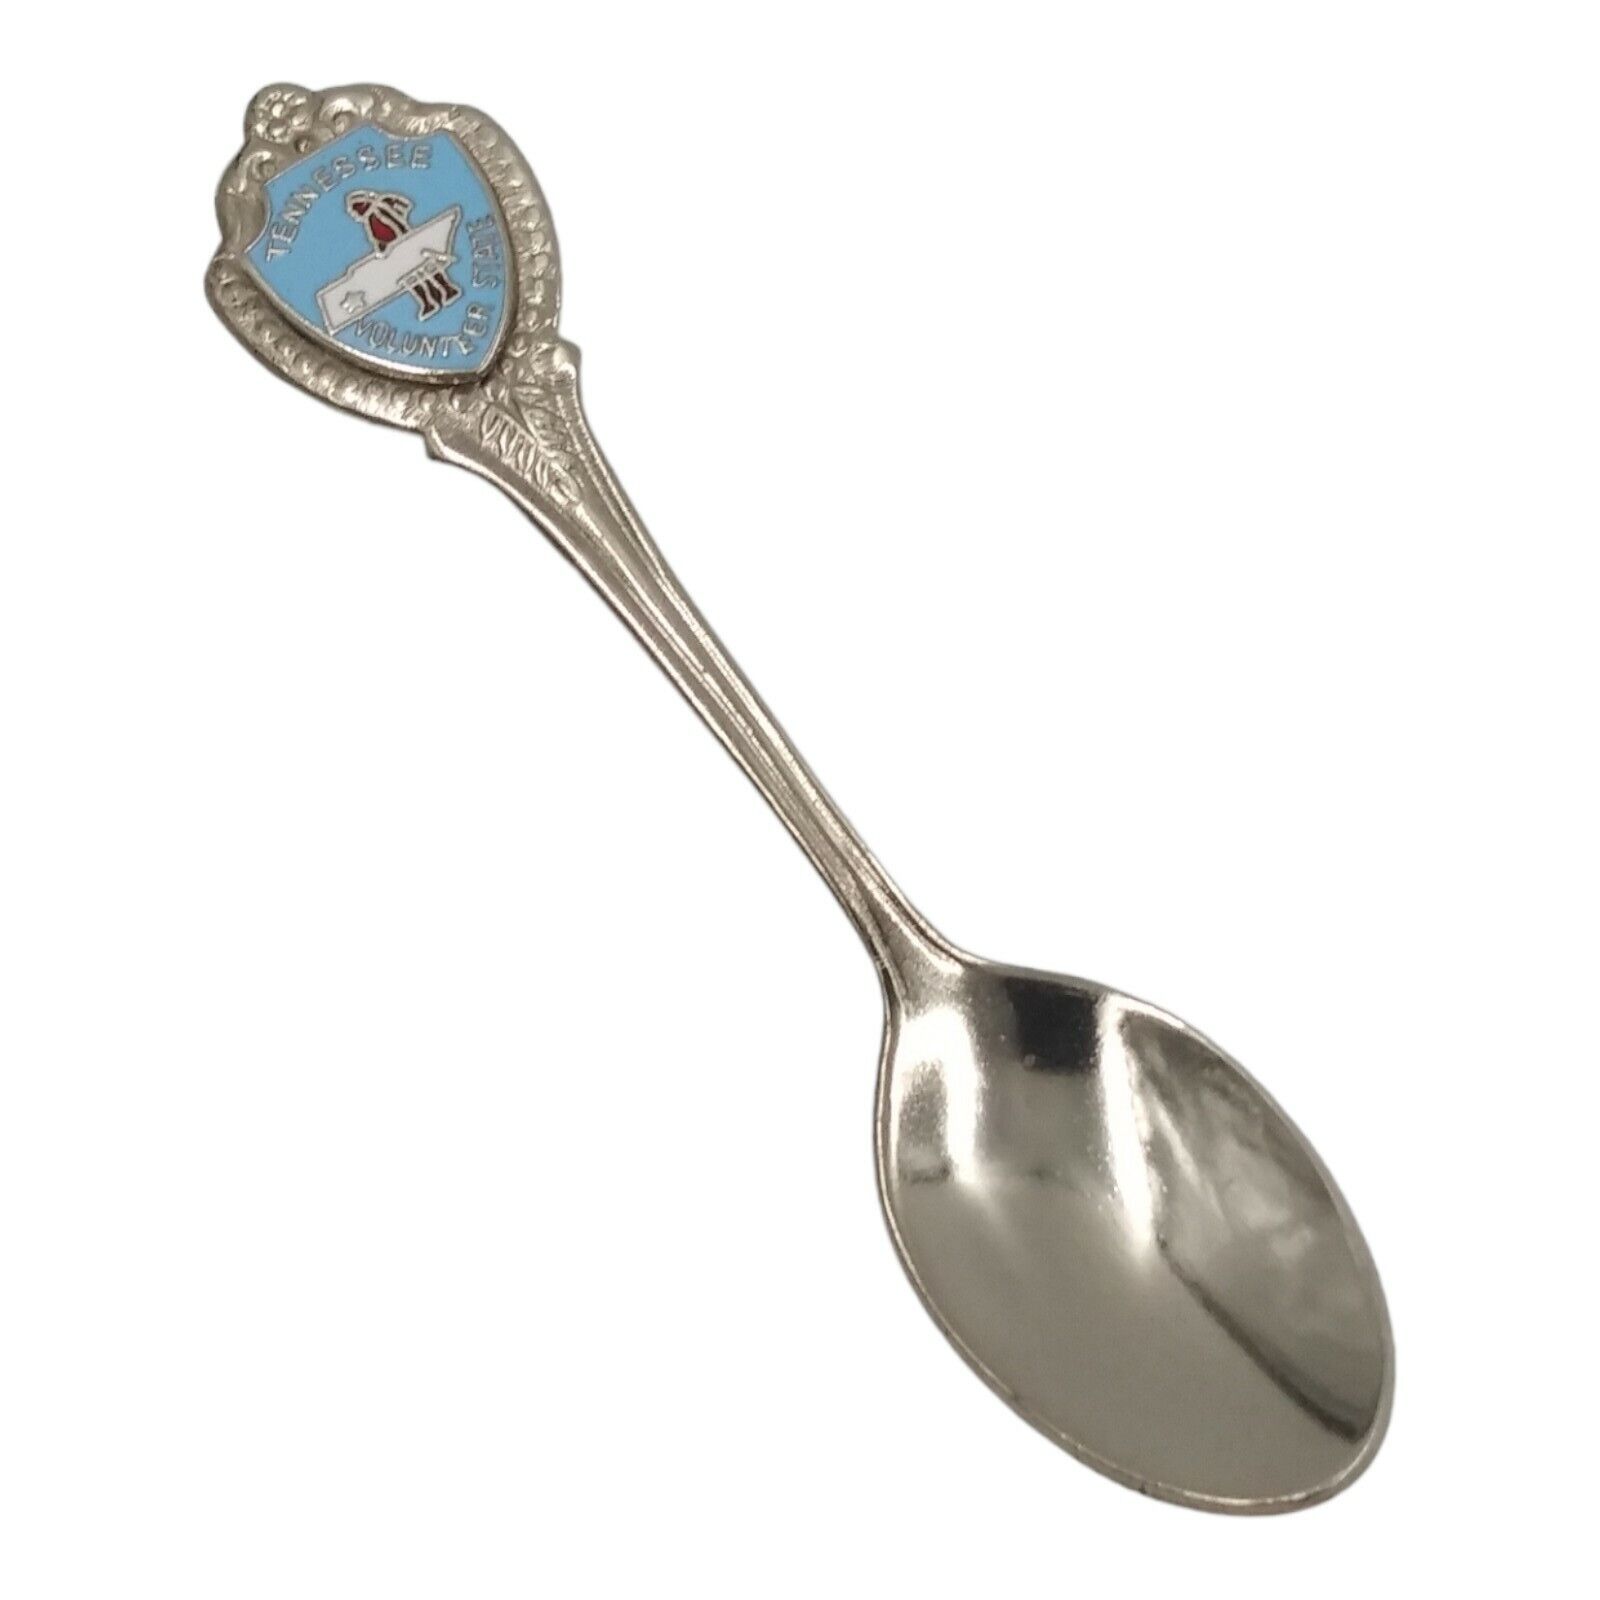 Vintage Tennessee Volunteer State Souvenir Spoon Collectible US State